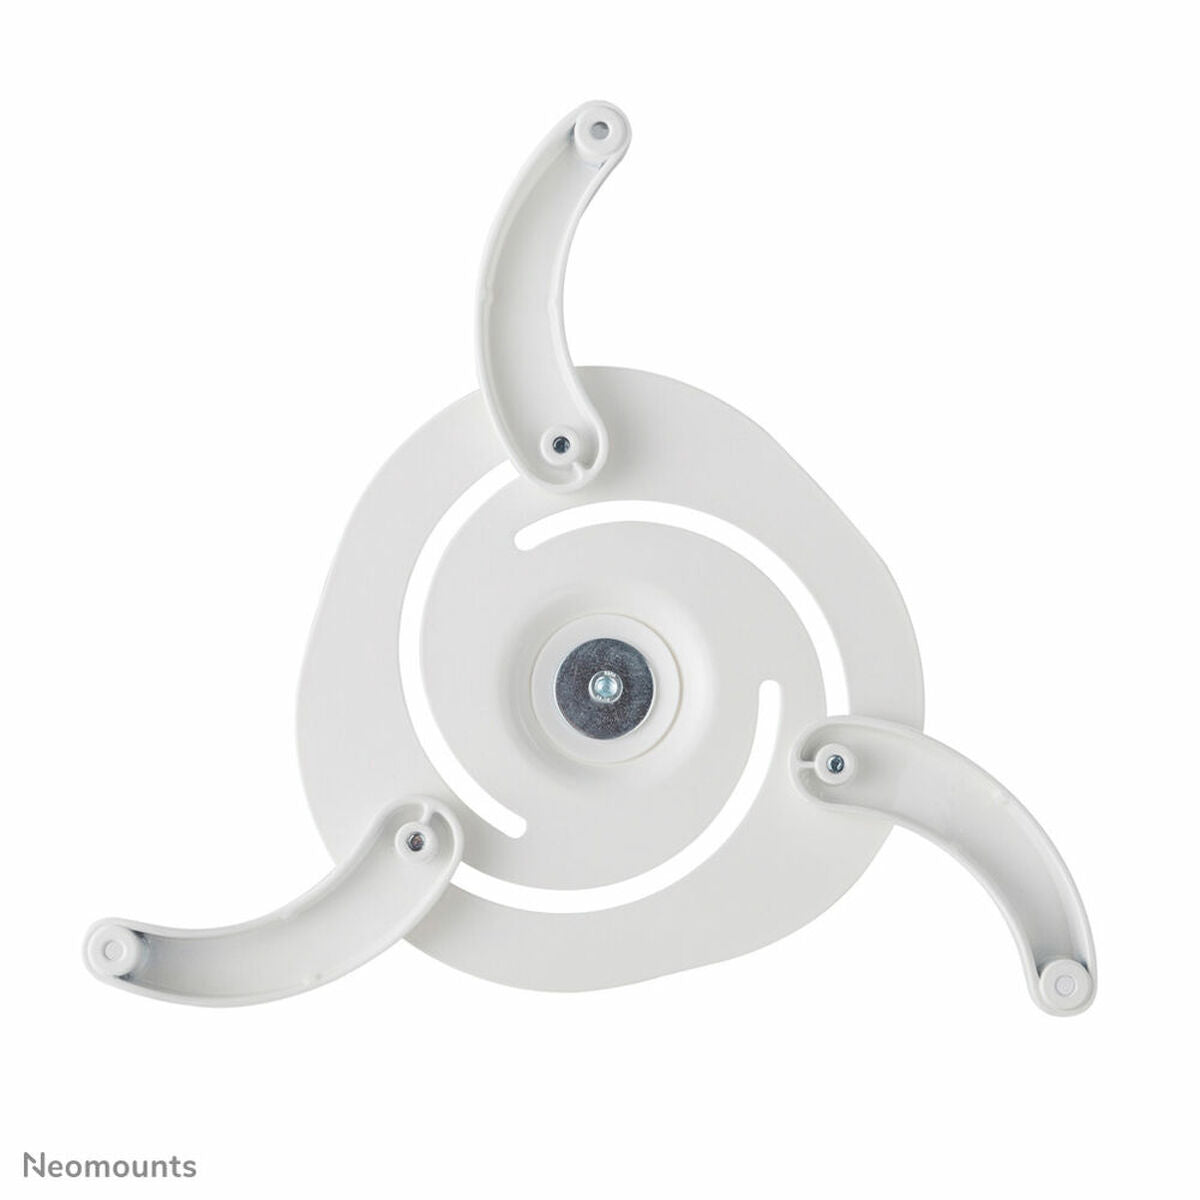 Ceiling Mount for Projectors Neomounts Q610542 White, Neomounts, Electronics, TV, Video and home cinema, ceiling-mount-for-projectors-neomounts-q610542-white, Brand_Neomounts, category-reference-2609, category-reference-2642, category-reference-2947, category-reference-t-18805, category-reference-t-19653, category-reference-t-19921, category-reference-t-21391, computers / peripherals, Condition_NEW, office, Price_50 - 100, RiotNook